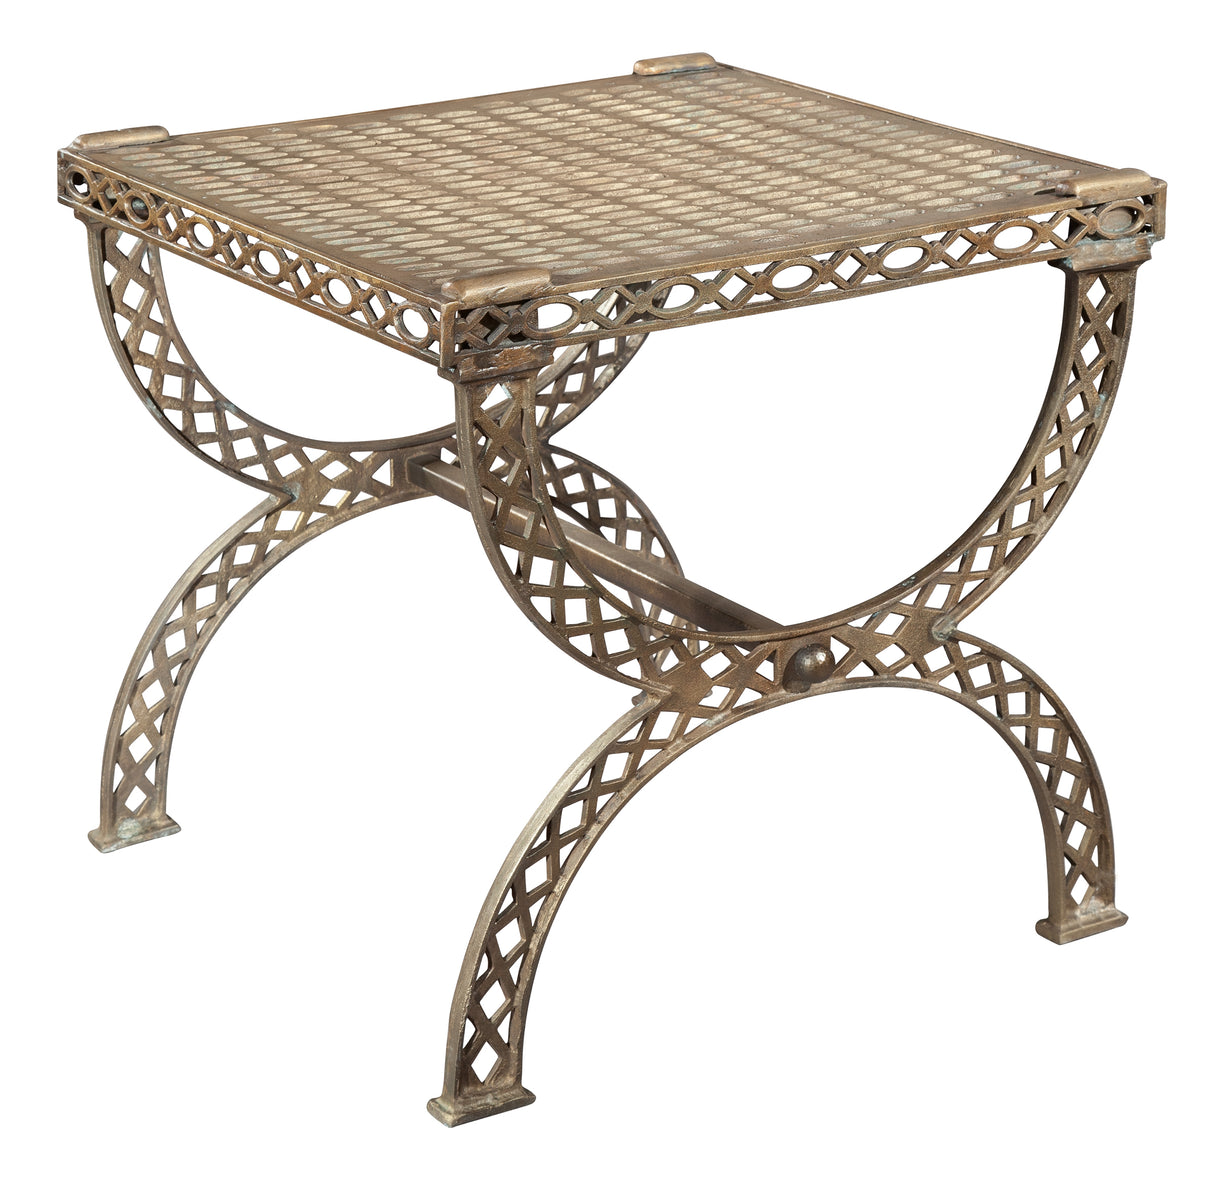 Hekman 27585 Accents 26.99in. x 24.99in. x 25.59in. End Table